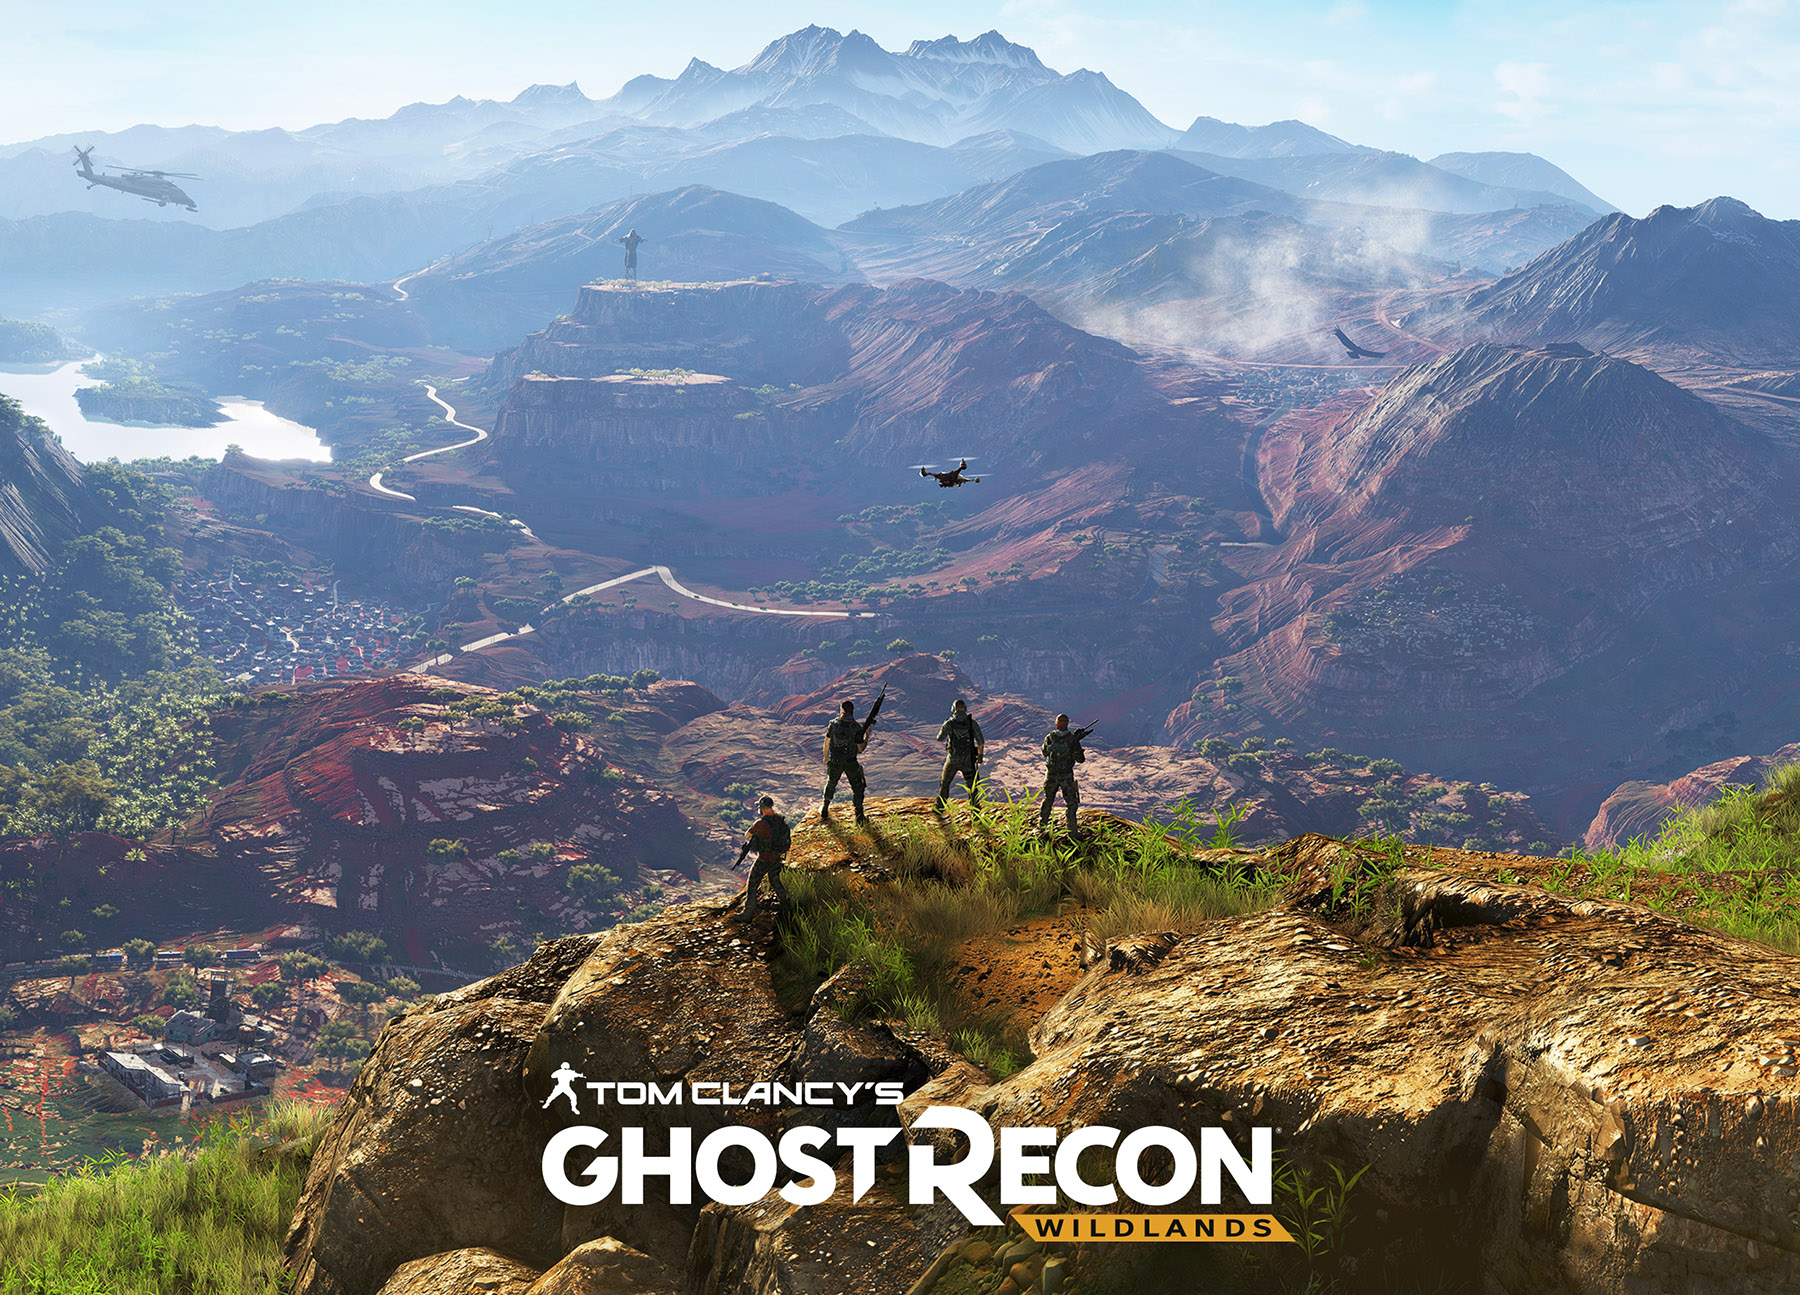 Data-Driven, Data-Informed, Data-Augmented: How Ubisoft’s Ghost Recon Wildlands Live Unit Uses Data for Continuous Product Innovation